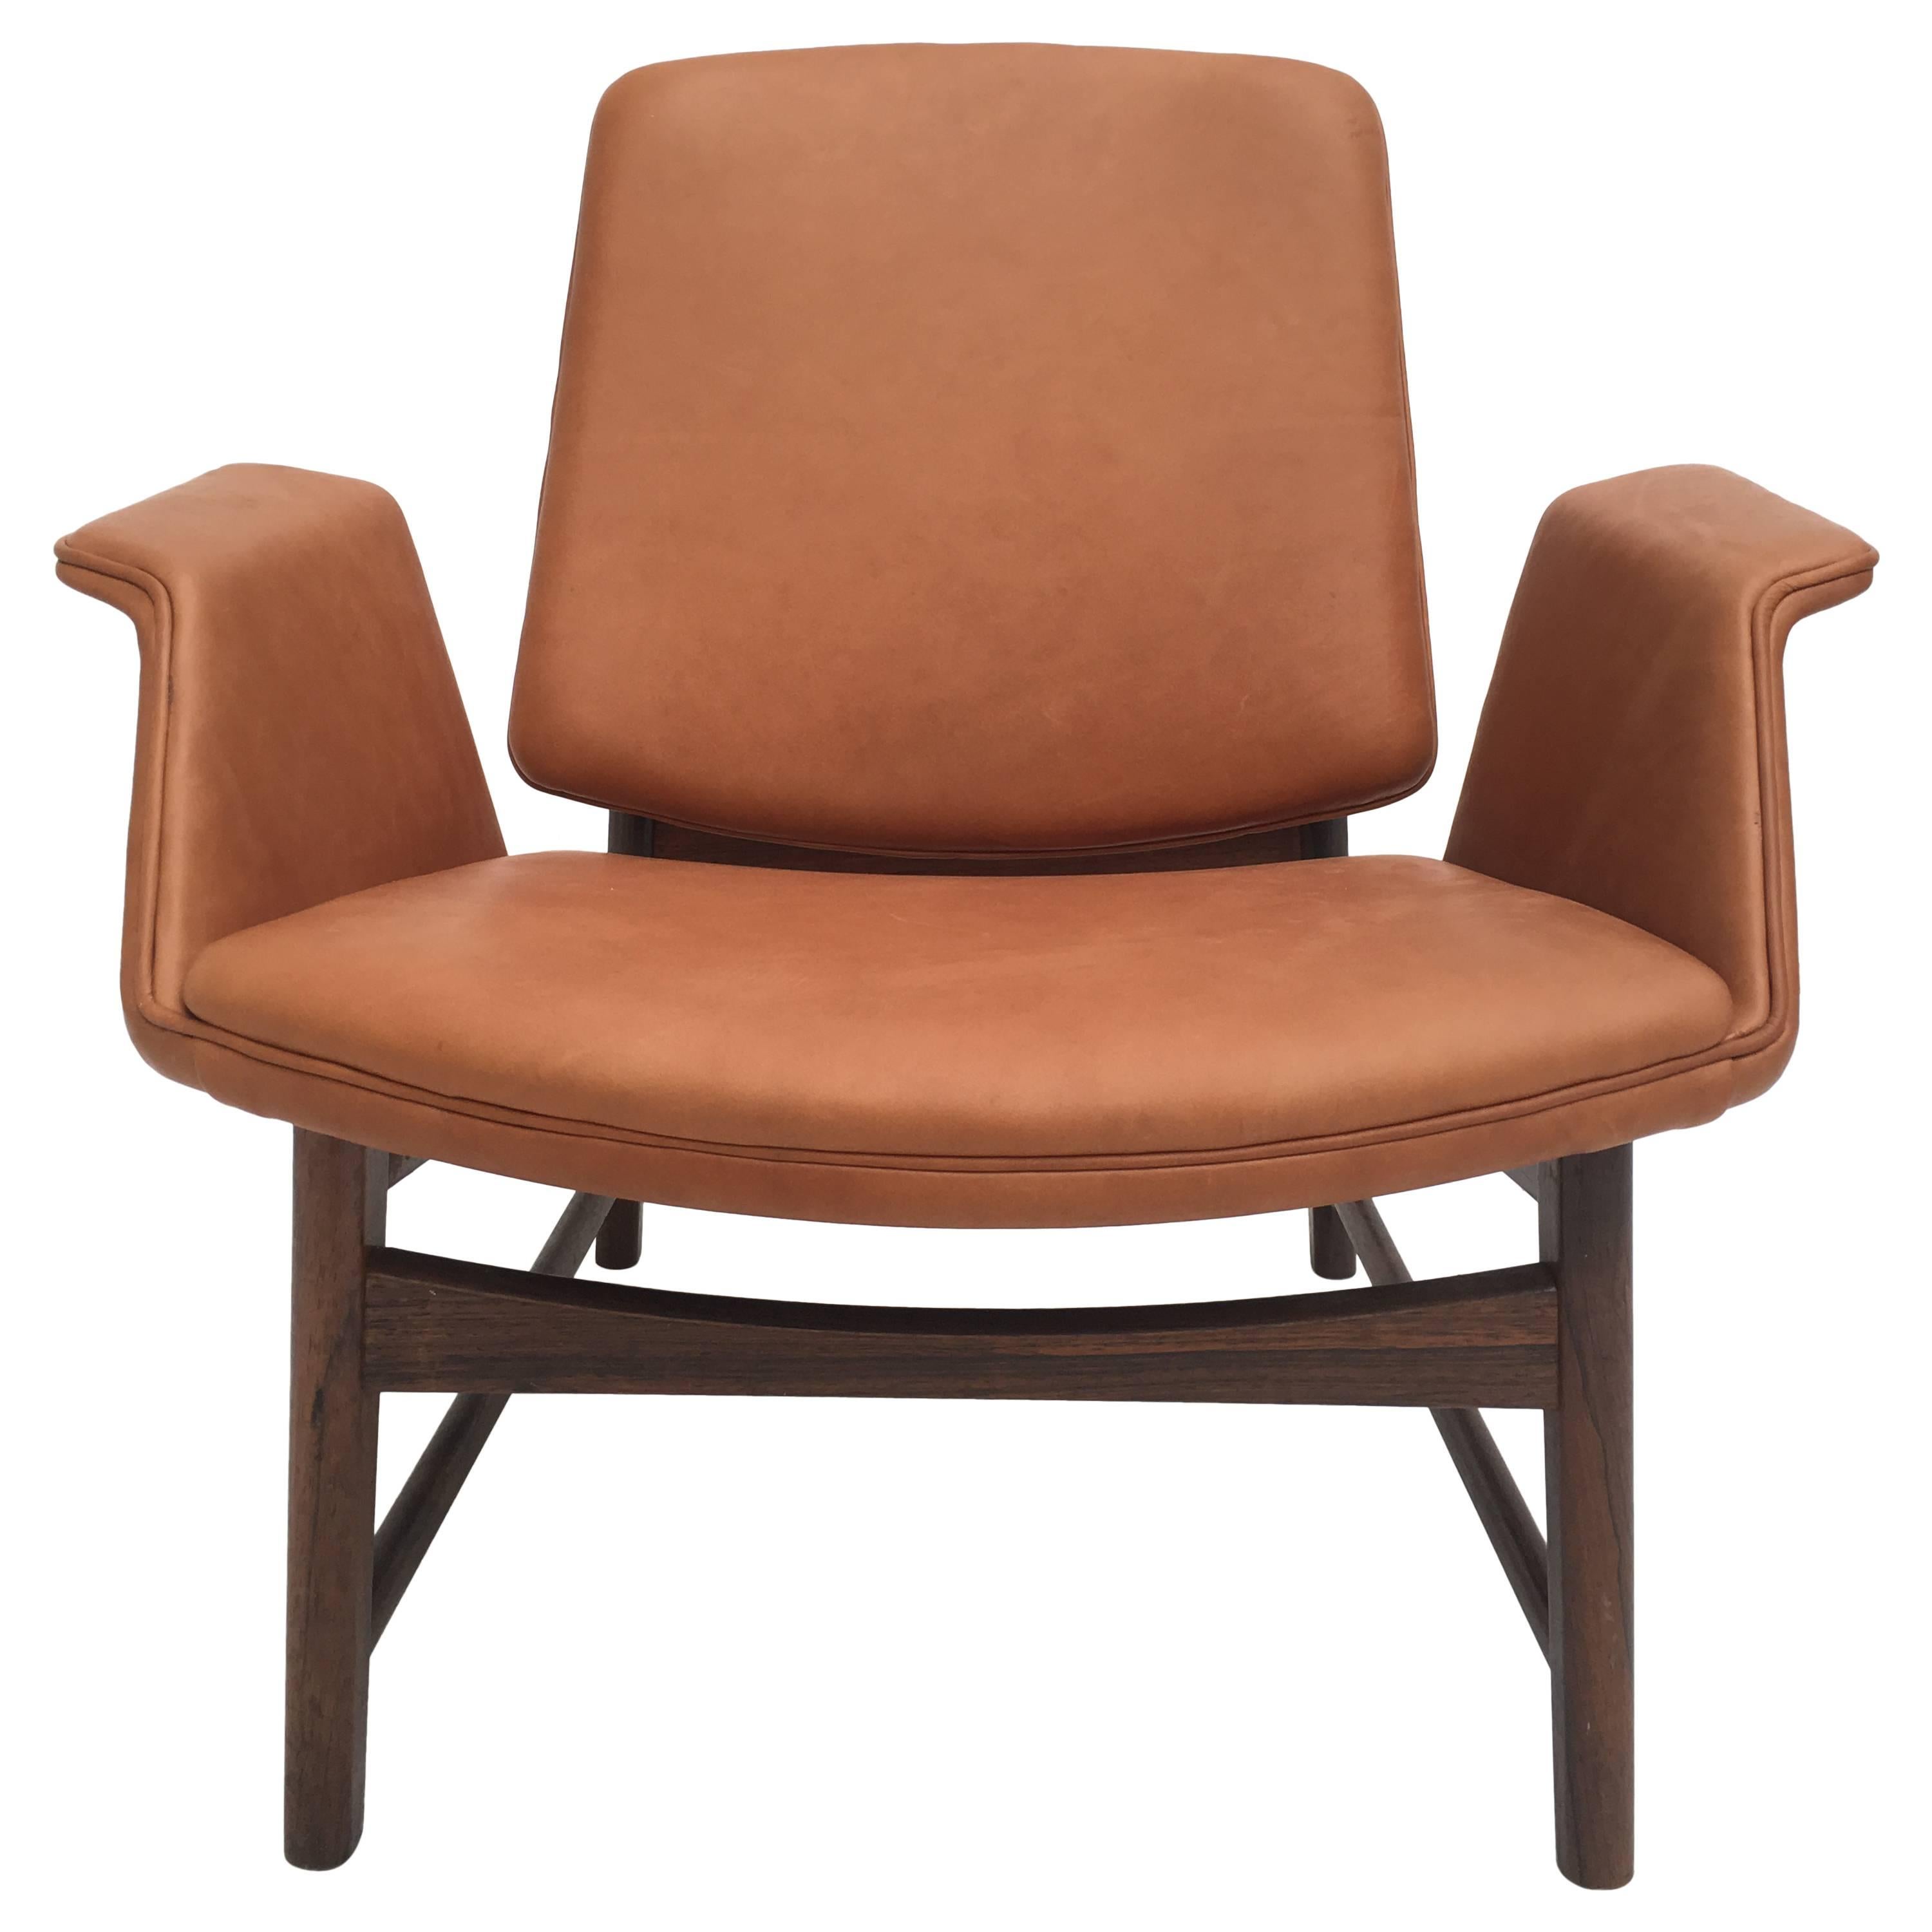 Very Rare Hans Olsen Mahogany and Leather Lounge Chair, Denmark, 1950s